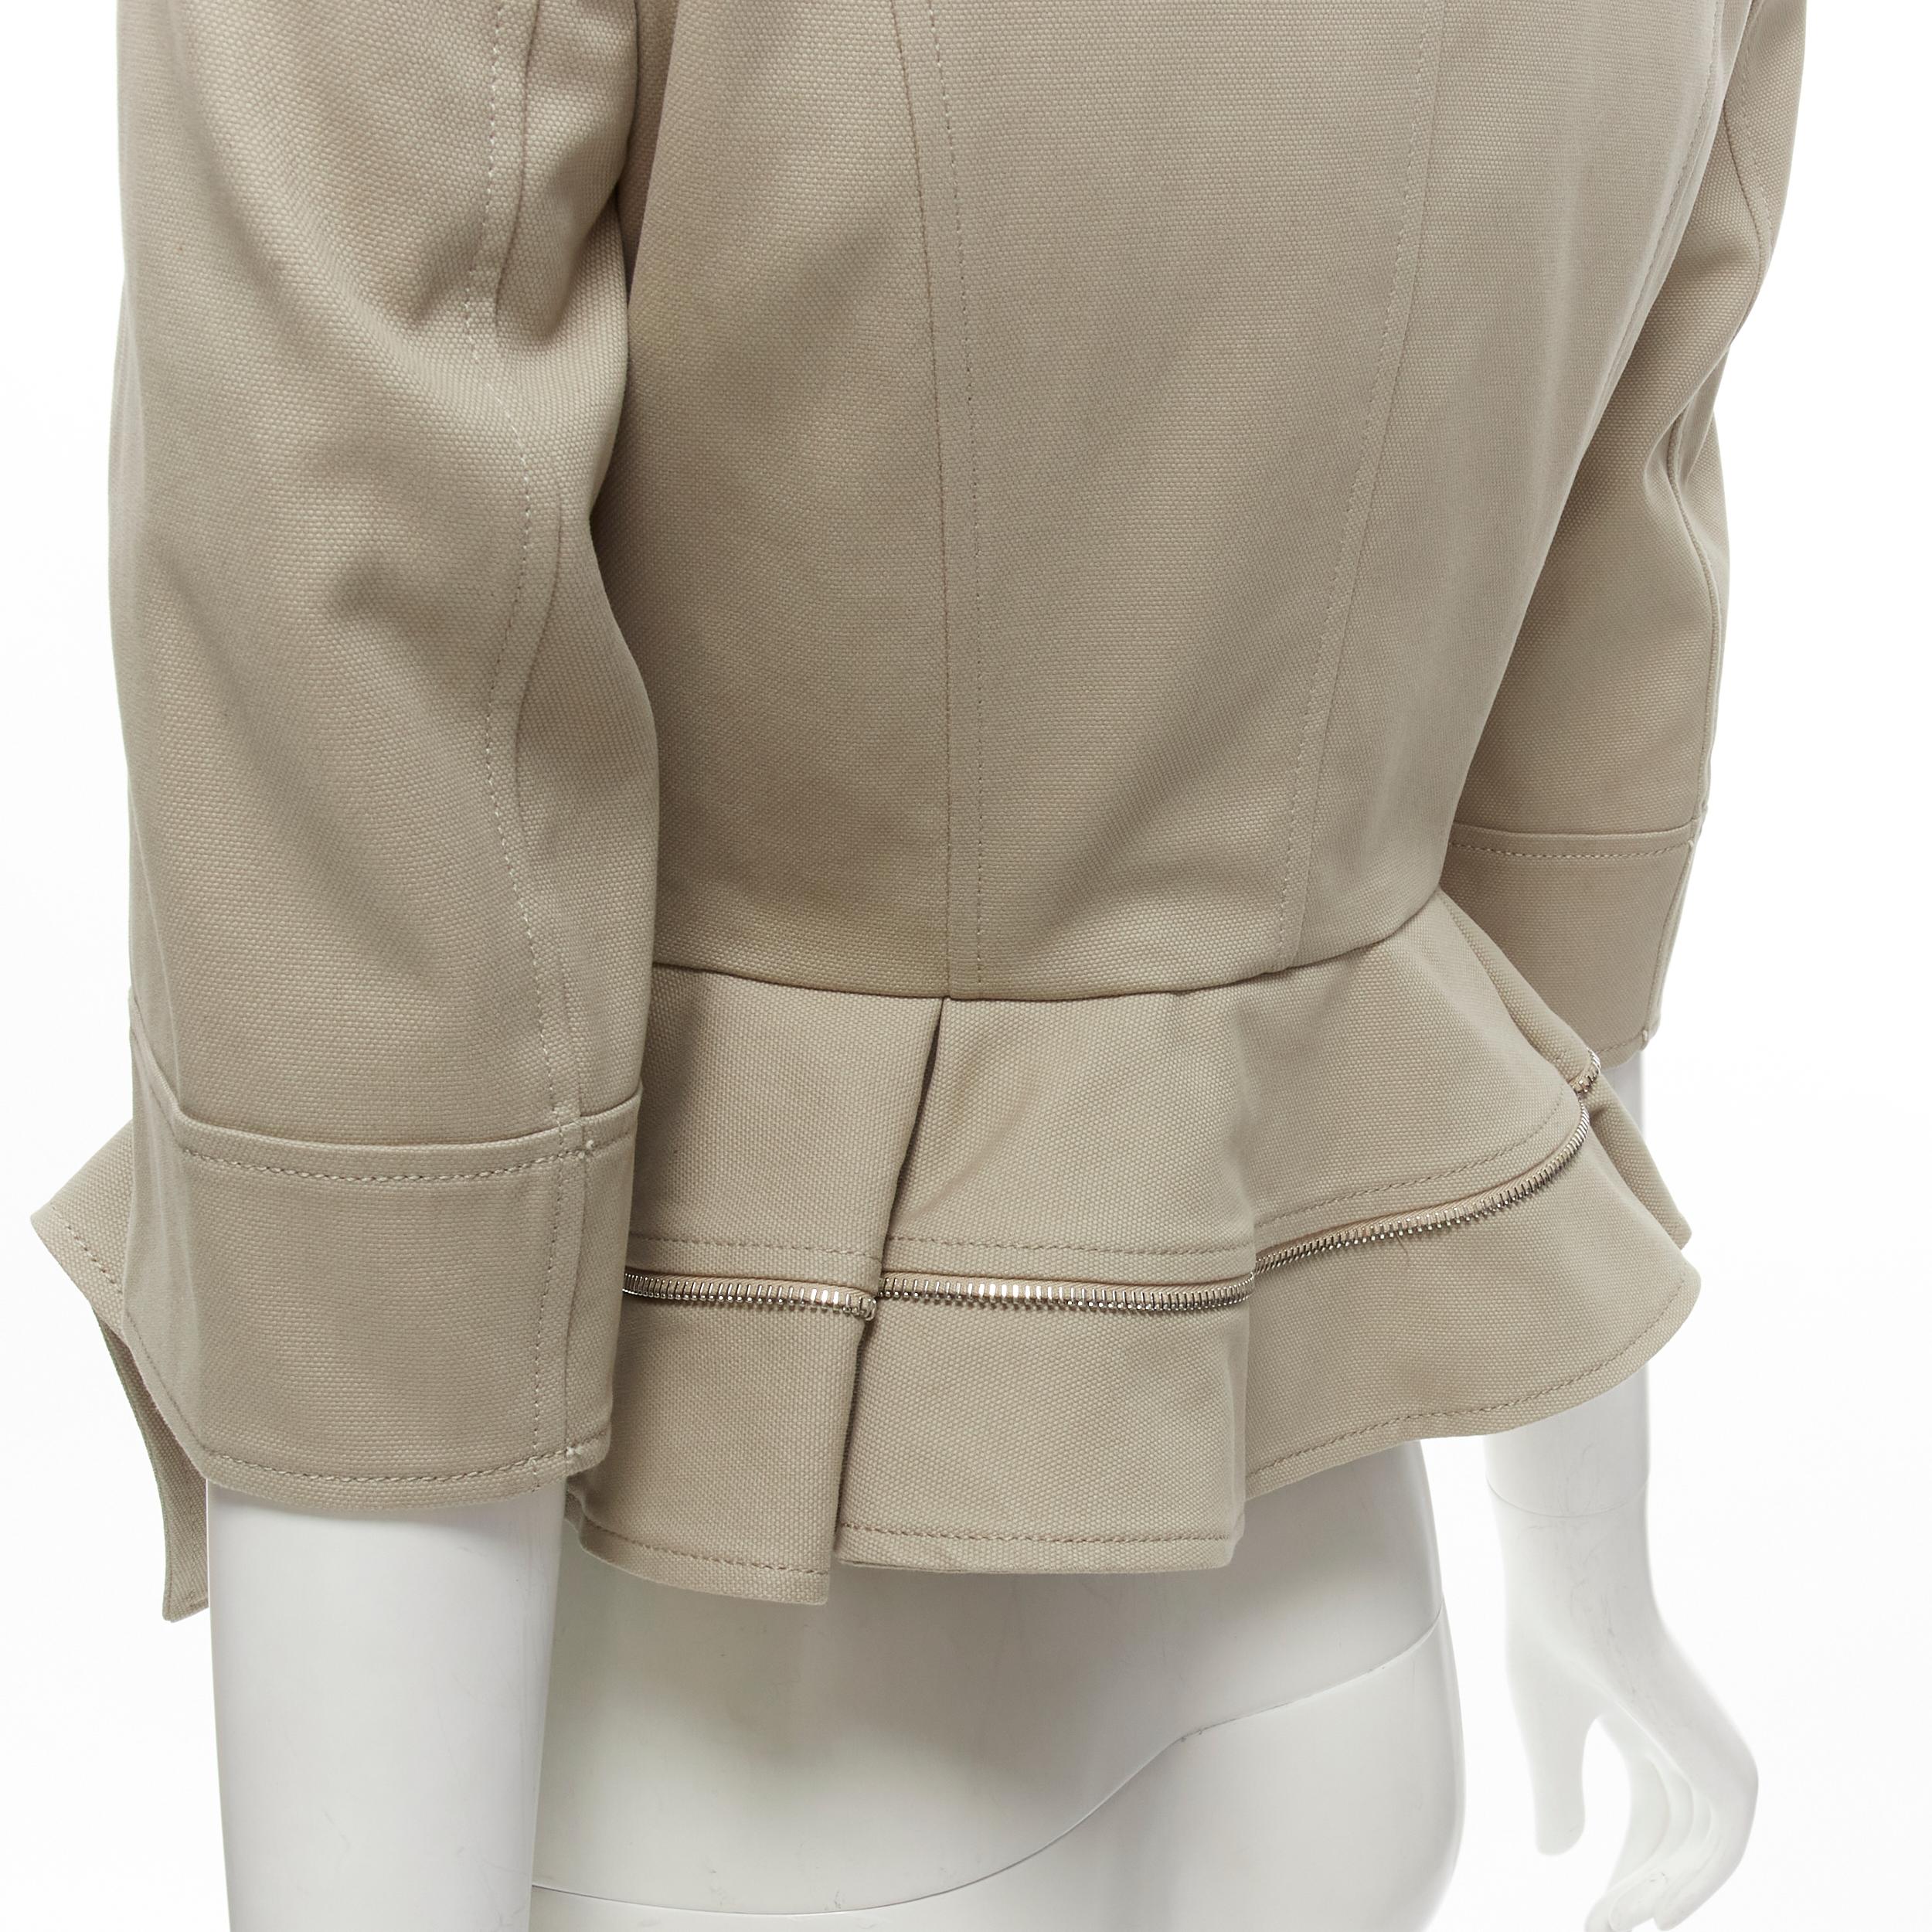 ALEXANDER MCQUEEN grey cotton fitted zipper trim peplum utility jacket IT38 XS
Brand: Alexander McQueen
Material: Cotton
Color: Grey
Pattern: Solid
Closure: Button
Extra Detail: Utility inspired flap pocket and shoulder epaulette. Silver-tone